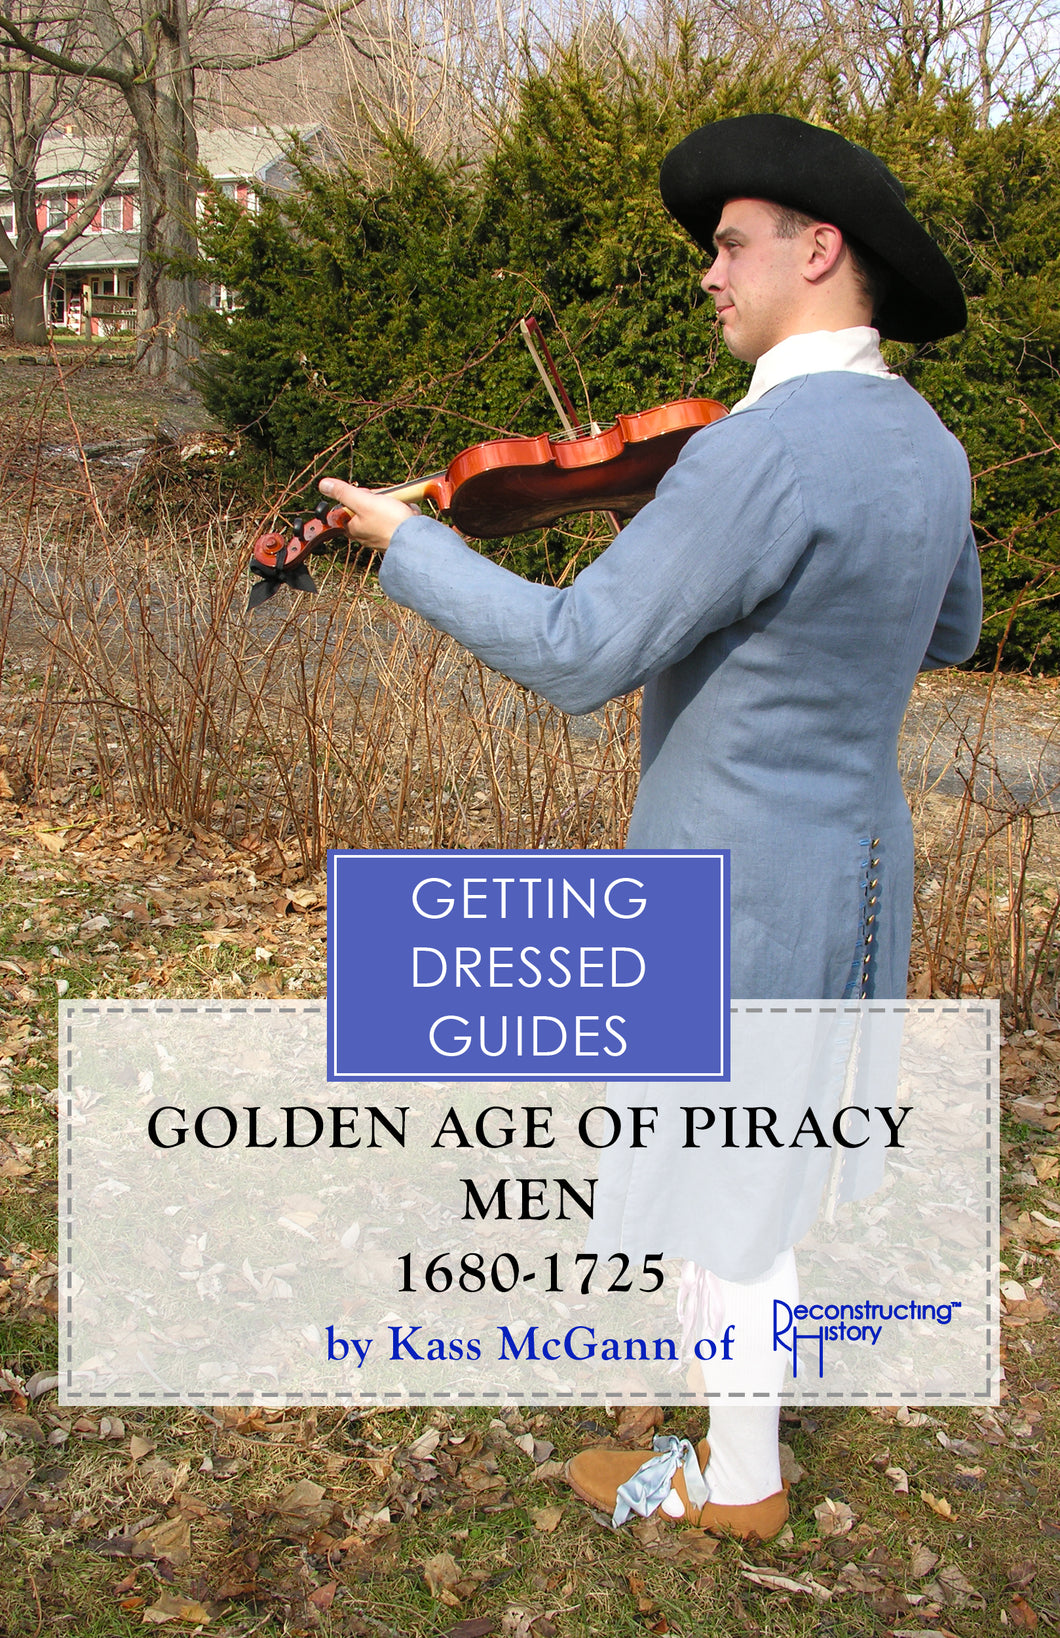 Golden Age of Piracy Men's Getting Dressed Guide